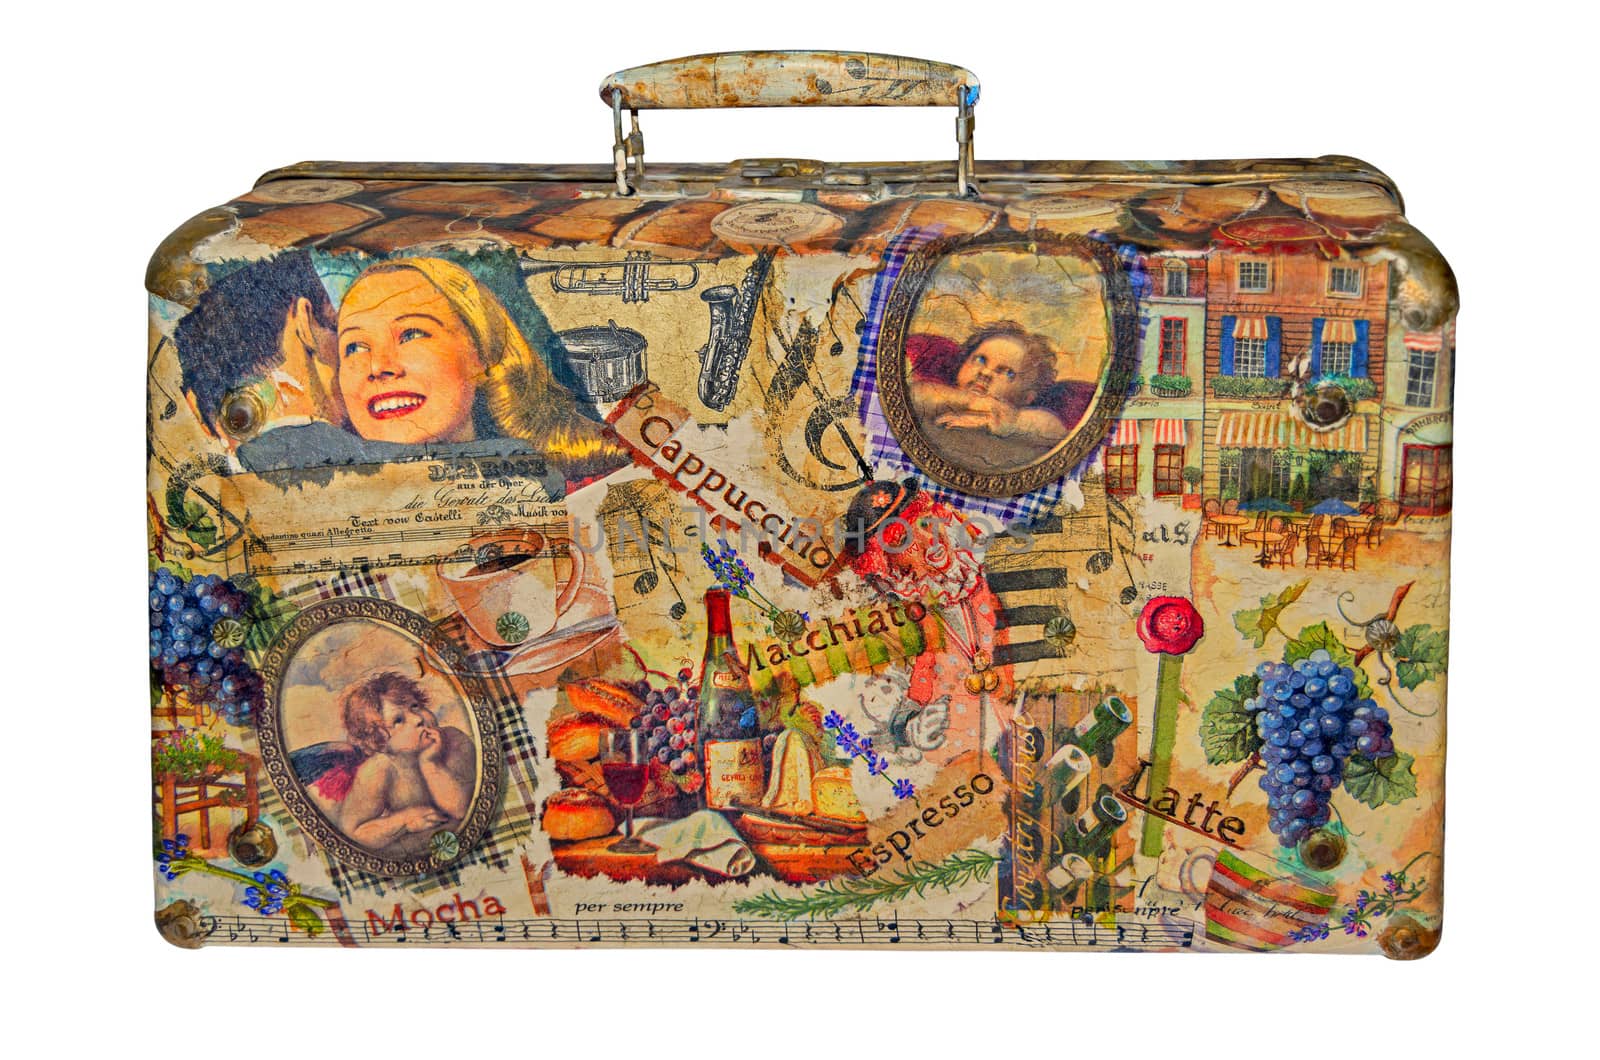 Creative retro valise on a white background pasted paper drawings.